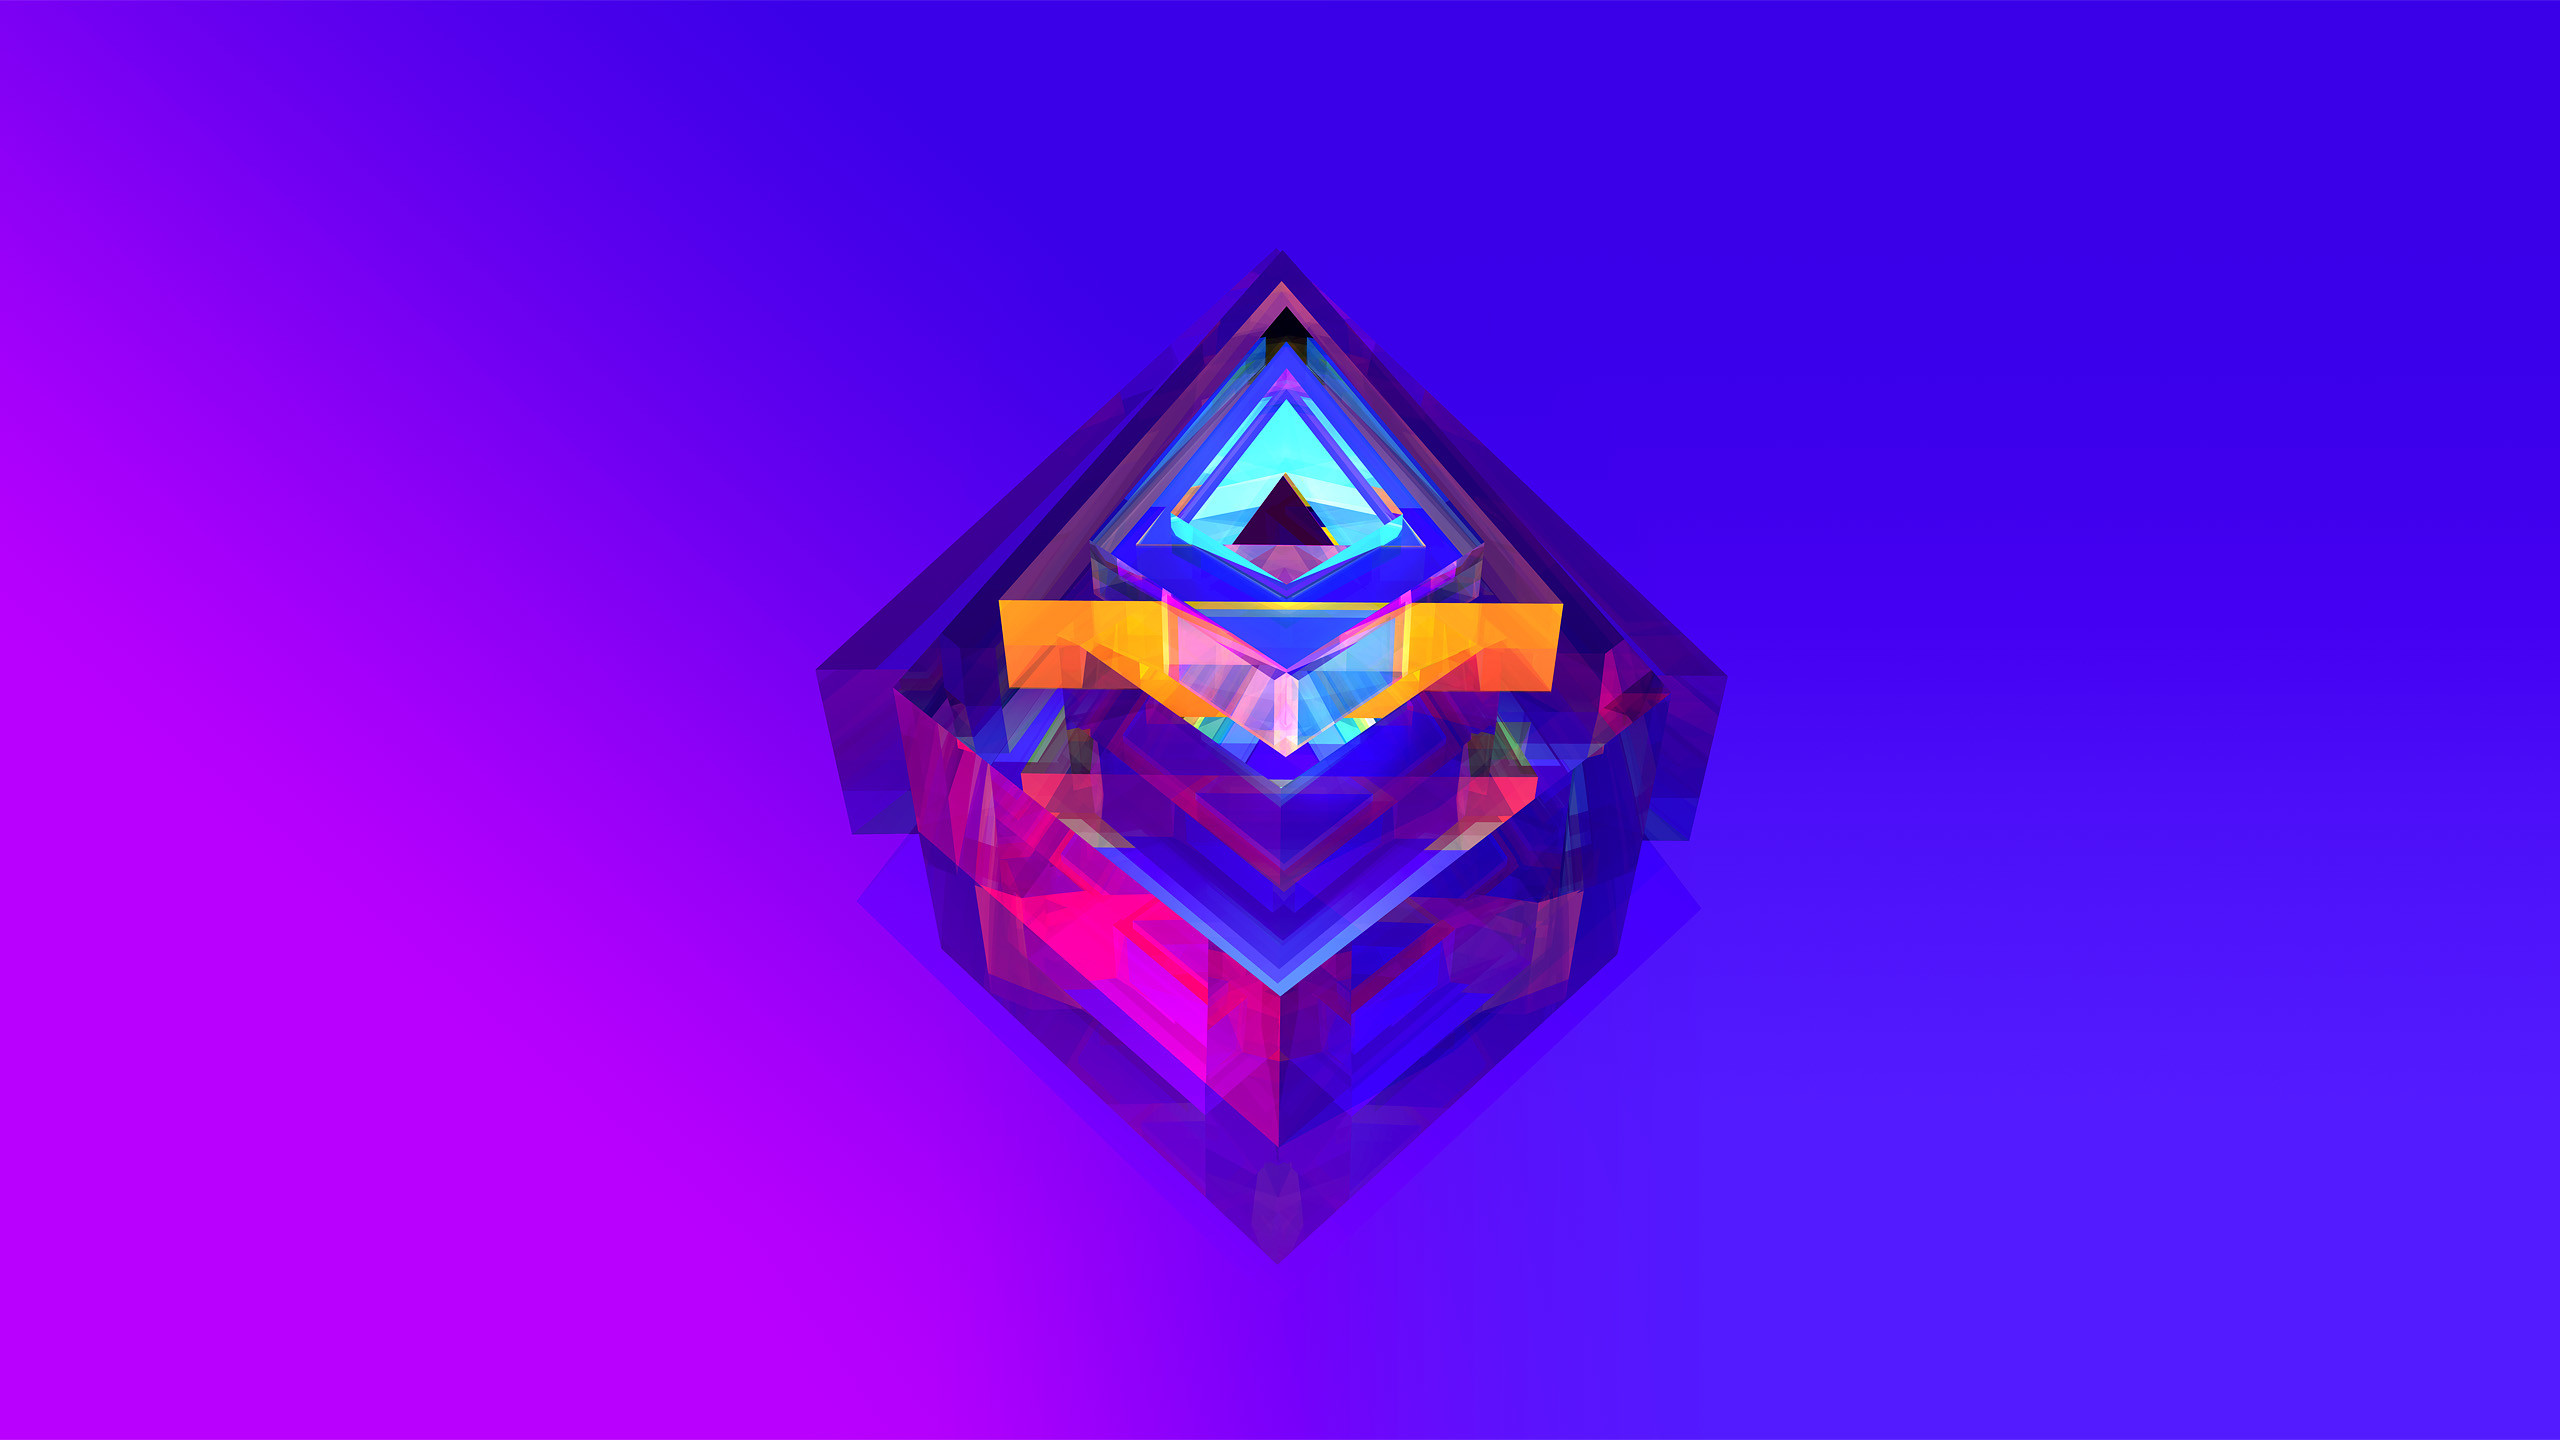 2560x1440 Facets by Justin Maller - Album on Imgur